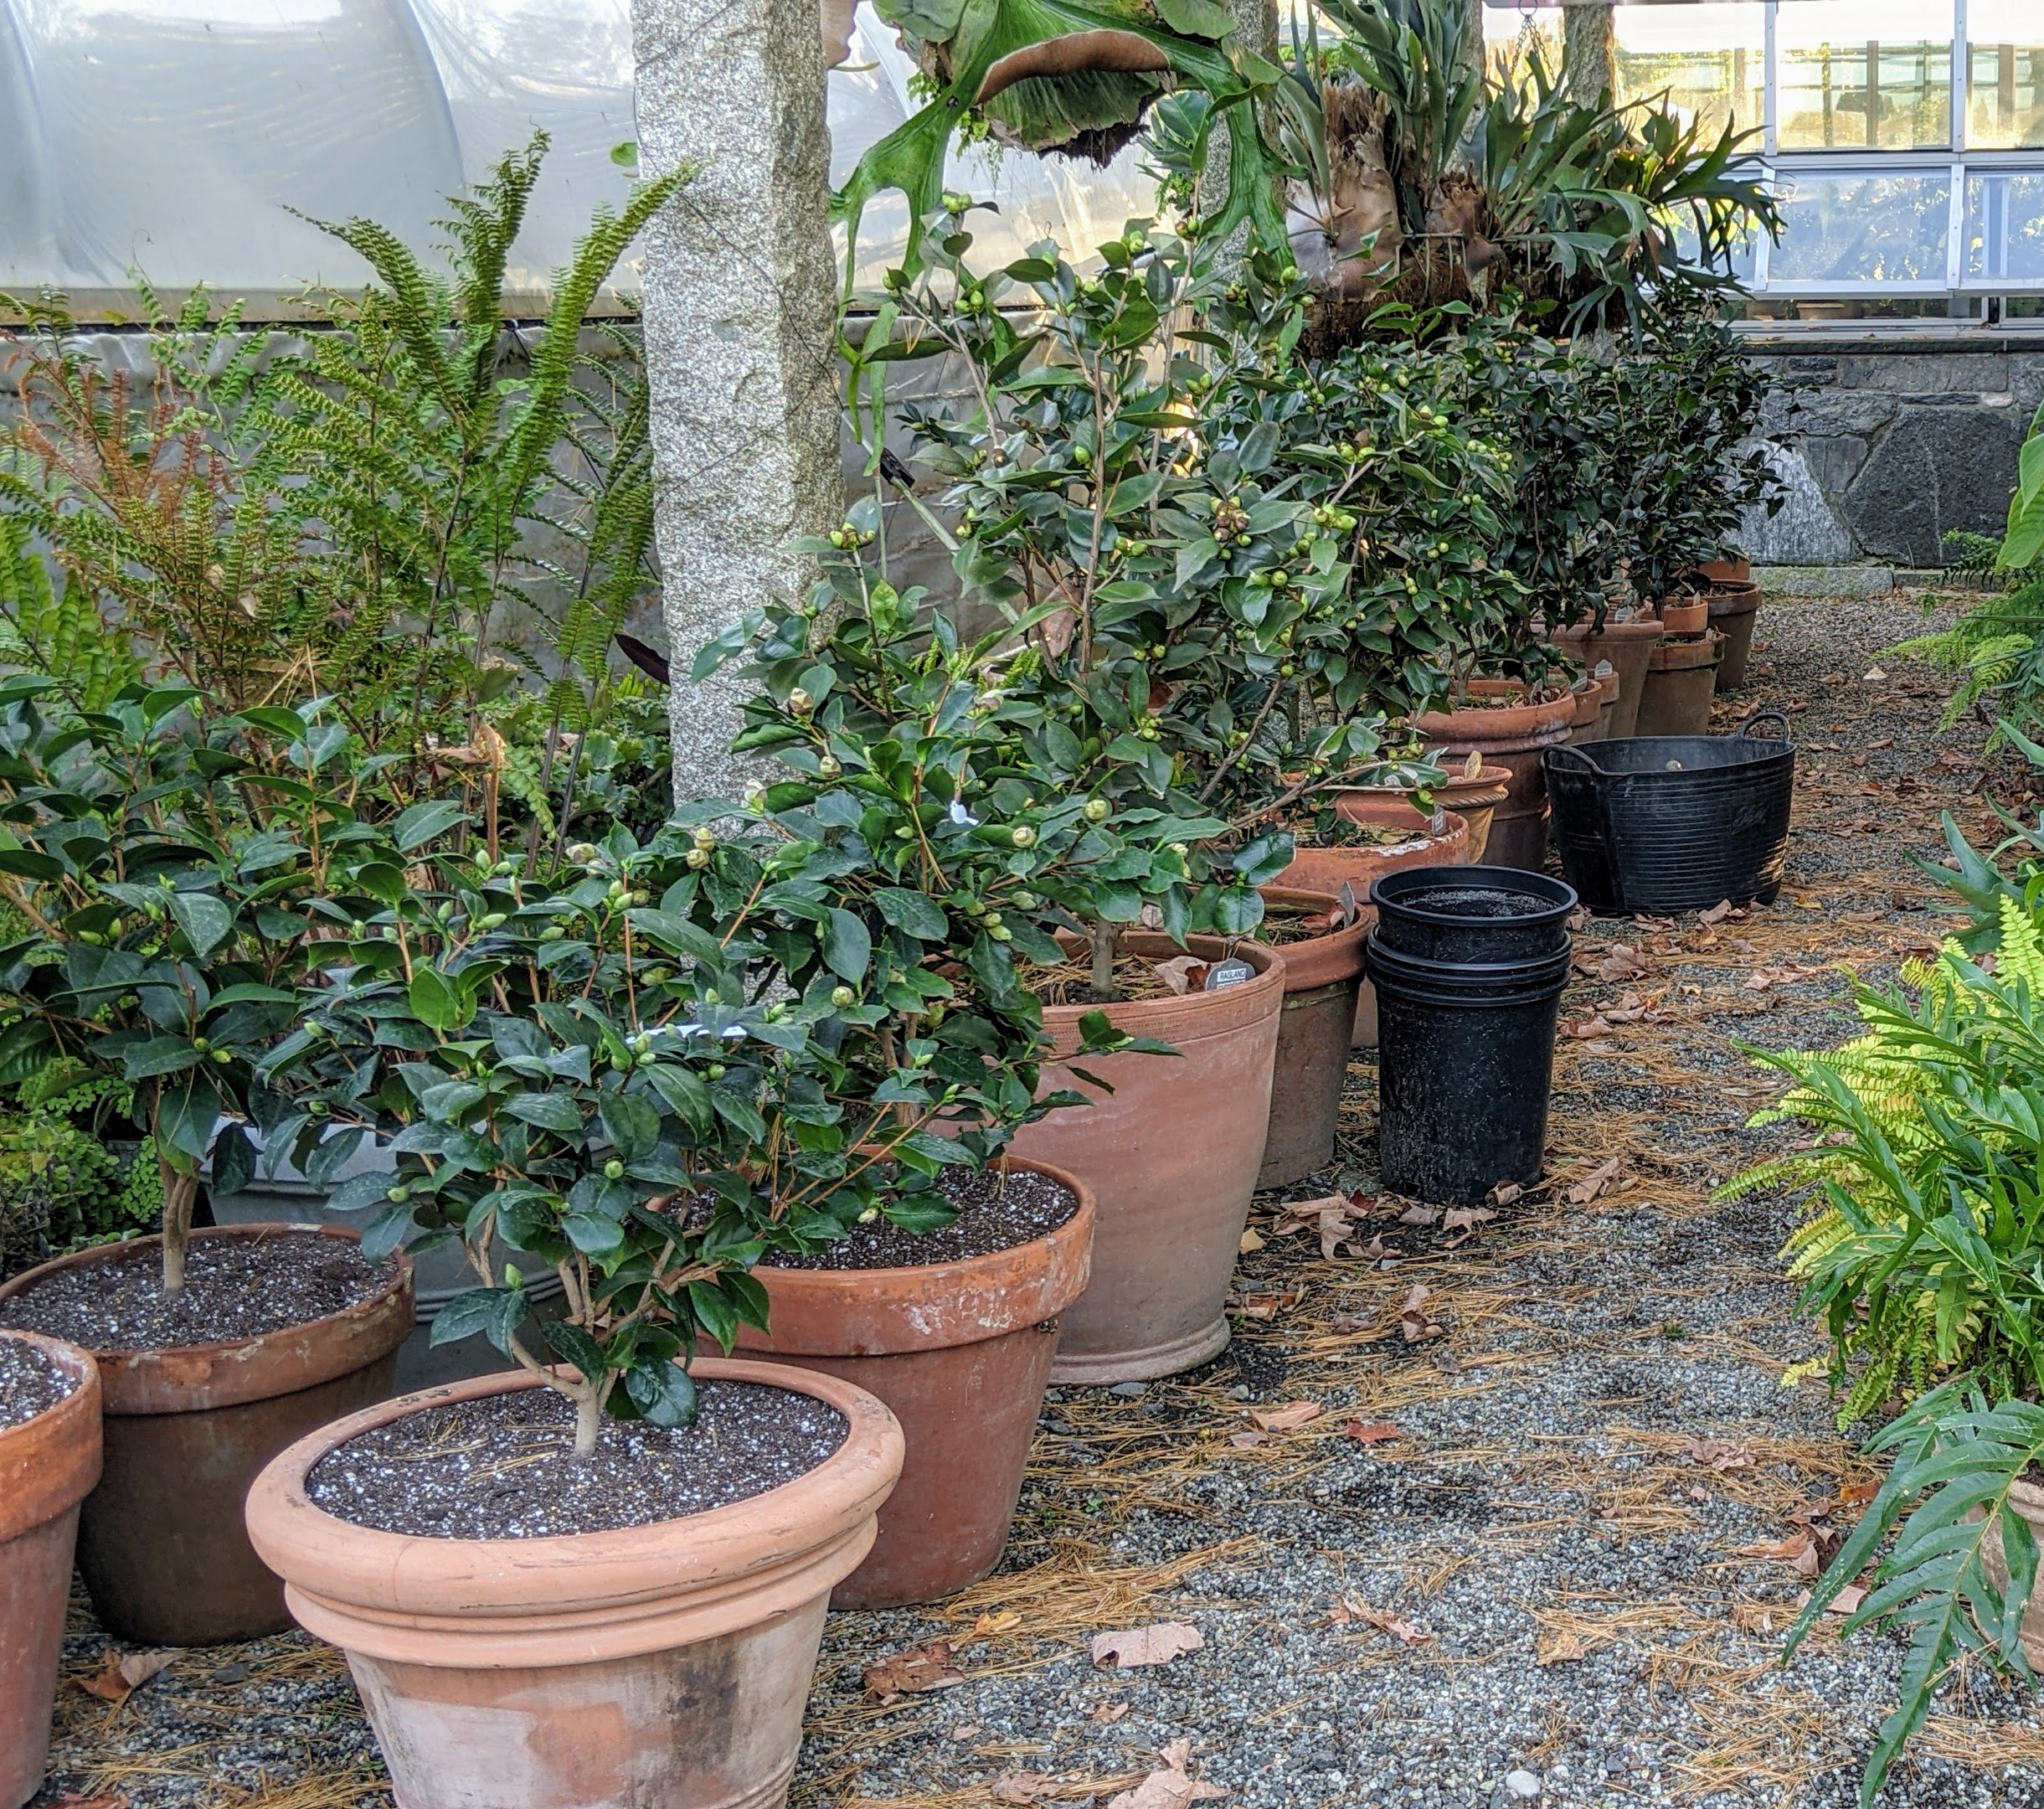 Camellia: Planting, Growing and Caring For Camellias